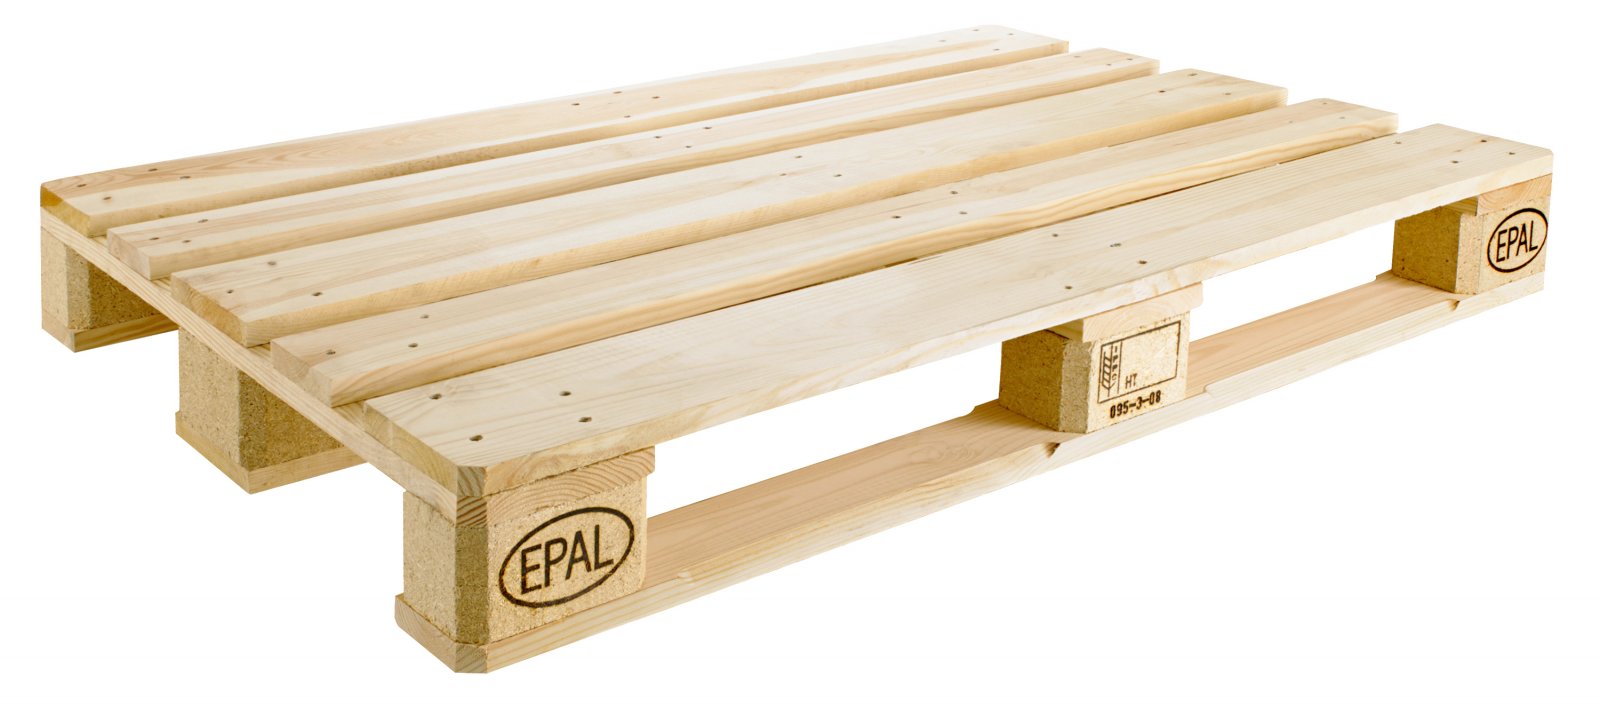 epal-records-3-growth-of-euro-pallets-in-2014.jpg